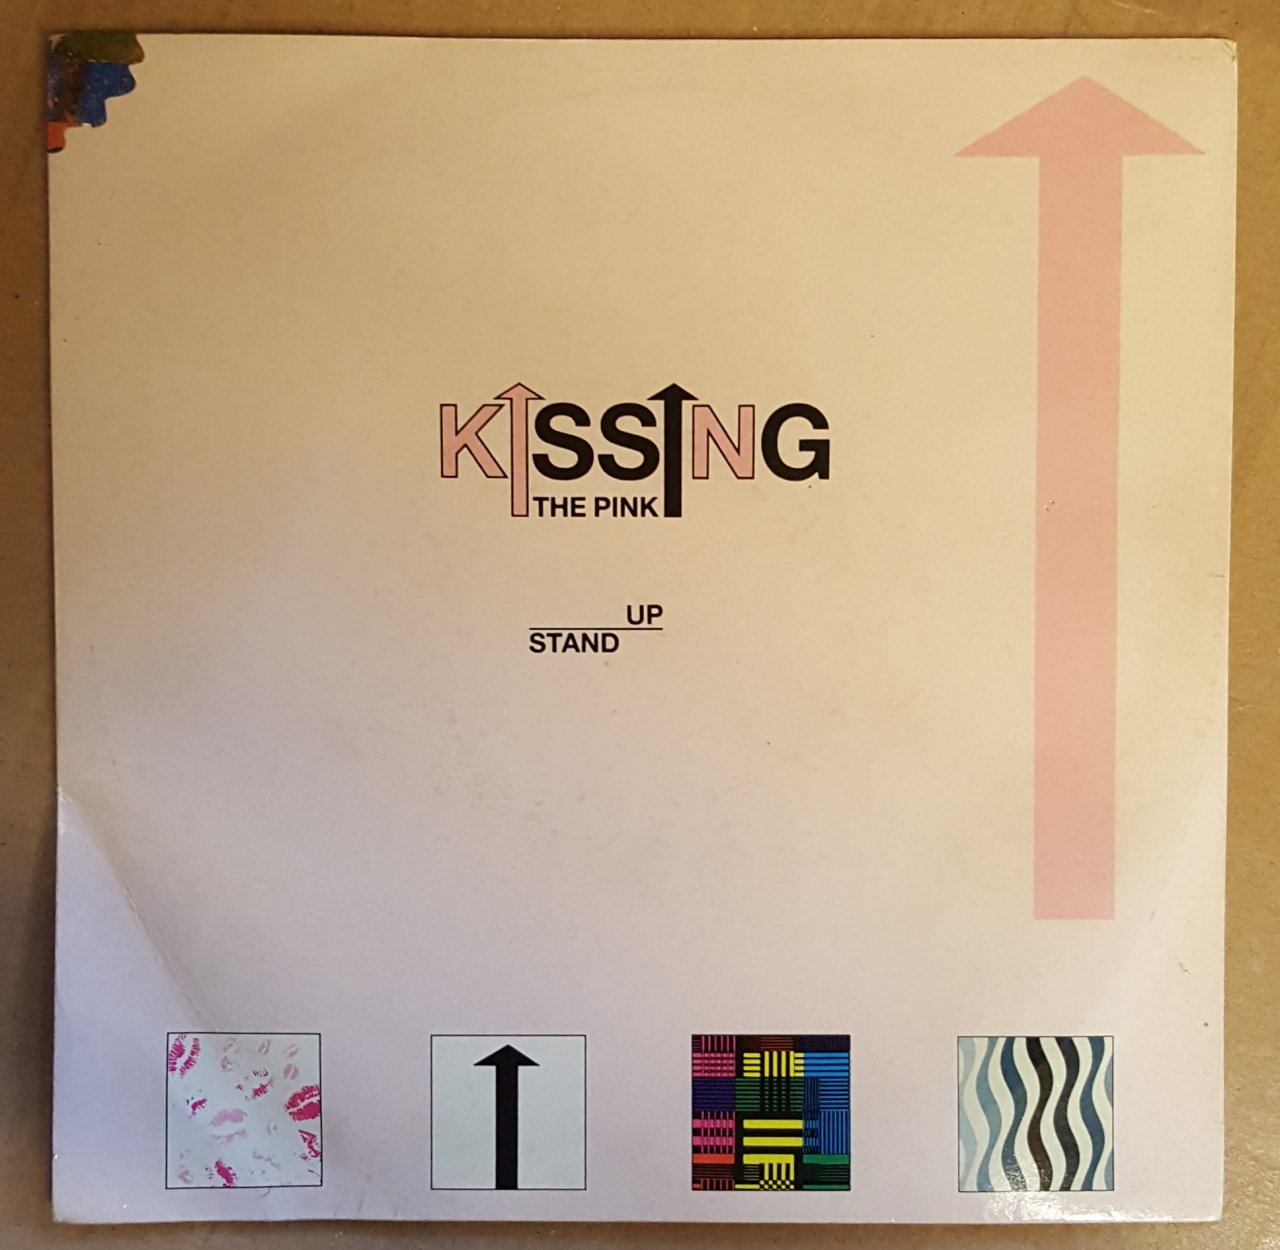 KISSING THE PINK - STAND UP / CERTAIN THINGS ARE LIKELY (1988) - 7'' 45 DEVİR SINGLE PLAK